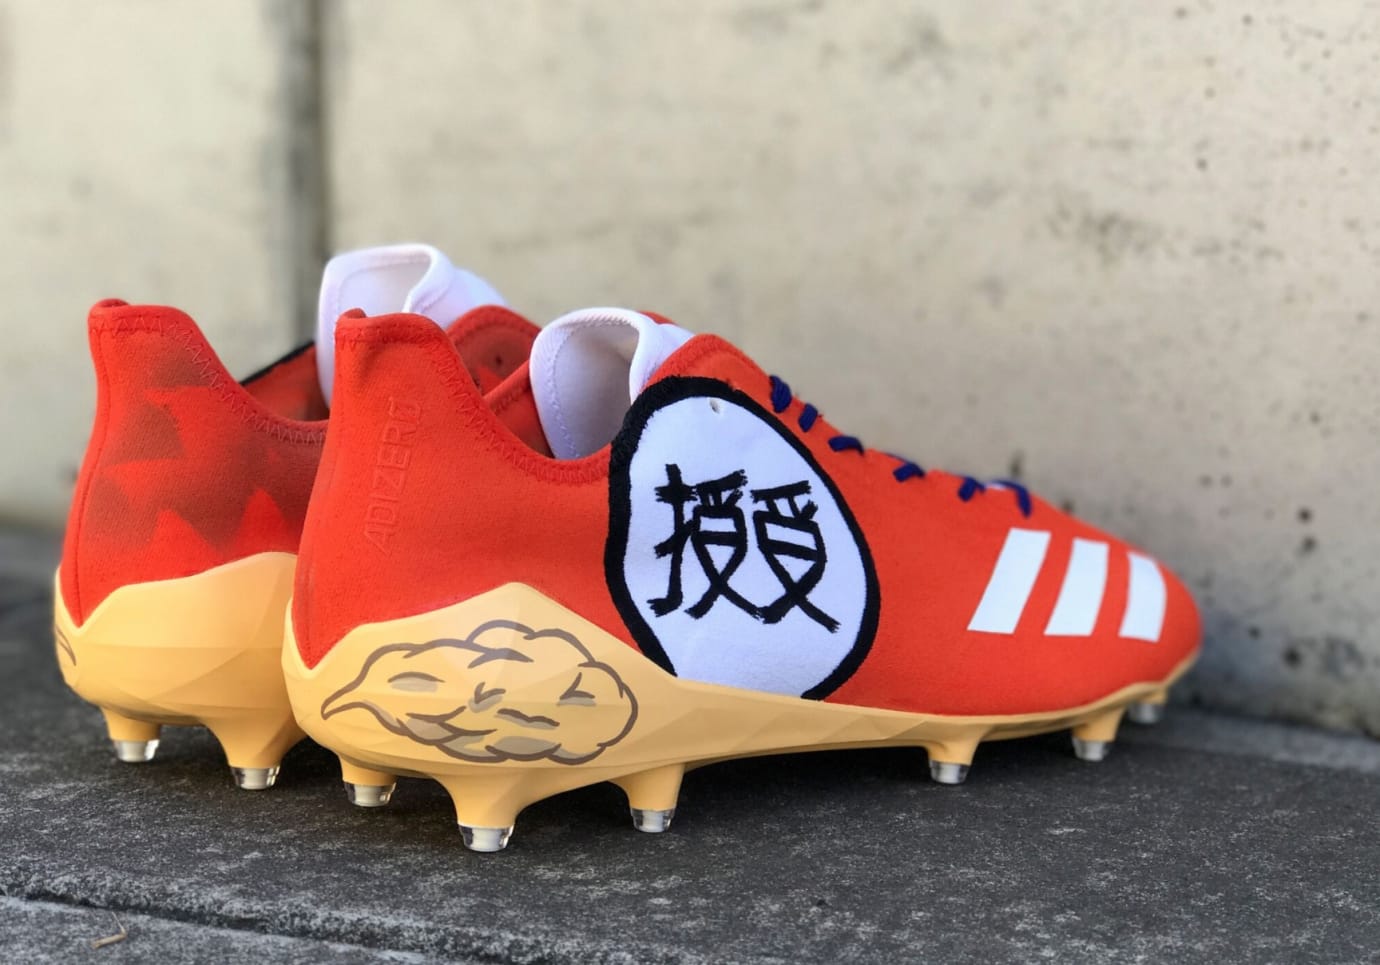 customize your own adidas football cleats